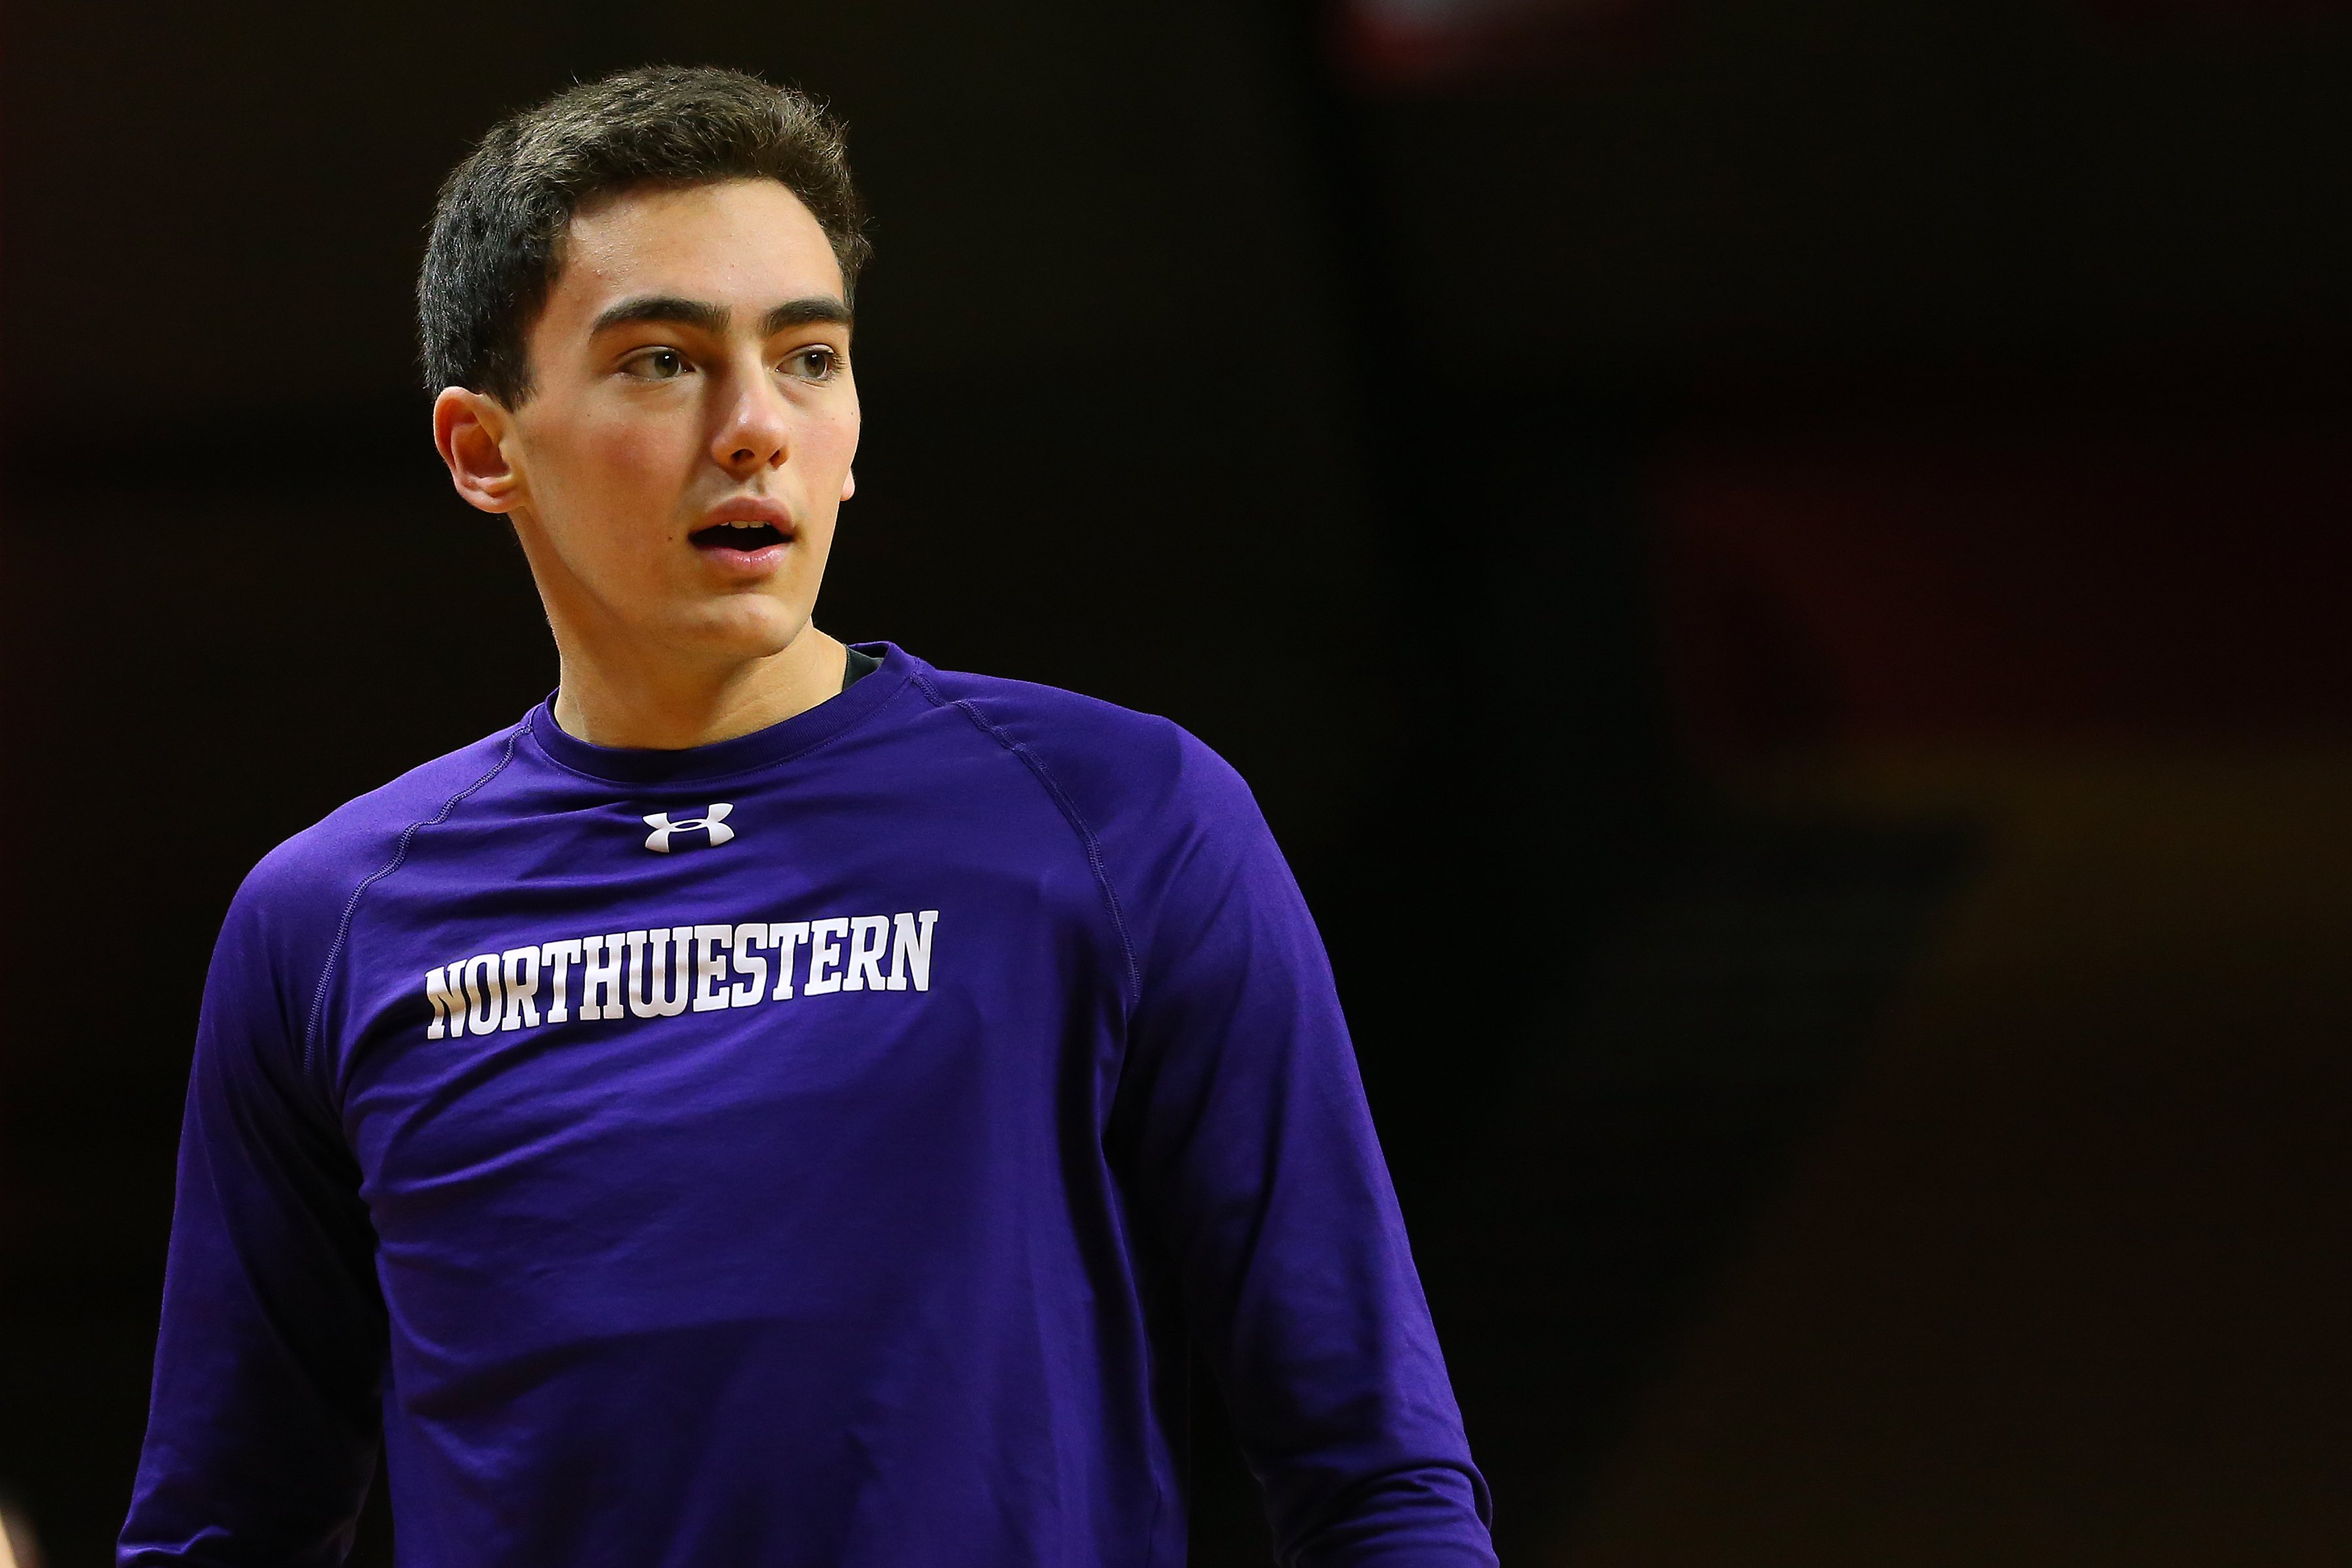 Charlie Hall #34 of the Northwestern Wildcats warms up before a game against the Rutgers Scarlet Knights at Rutgers Athletic Center on January 18, 2019, in Piscataway, New Jersey. | Source: Getty Images.